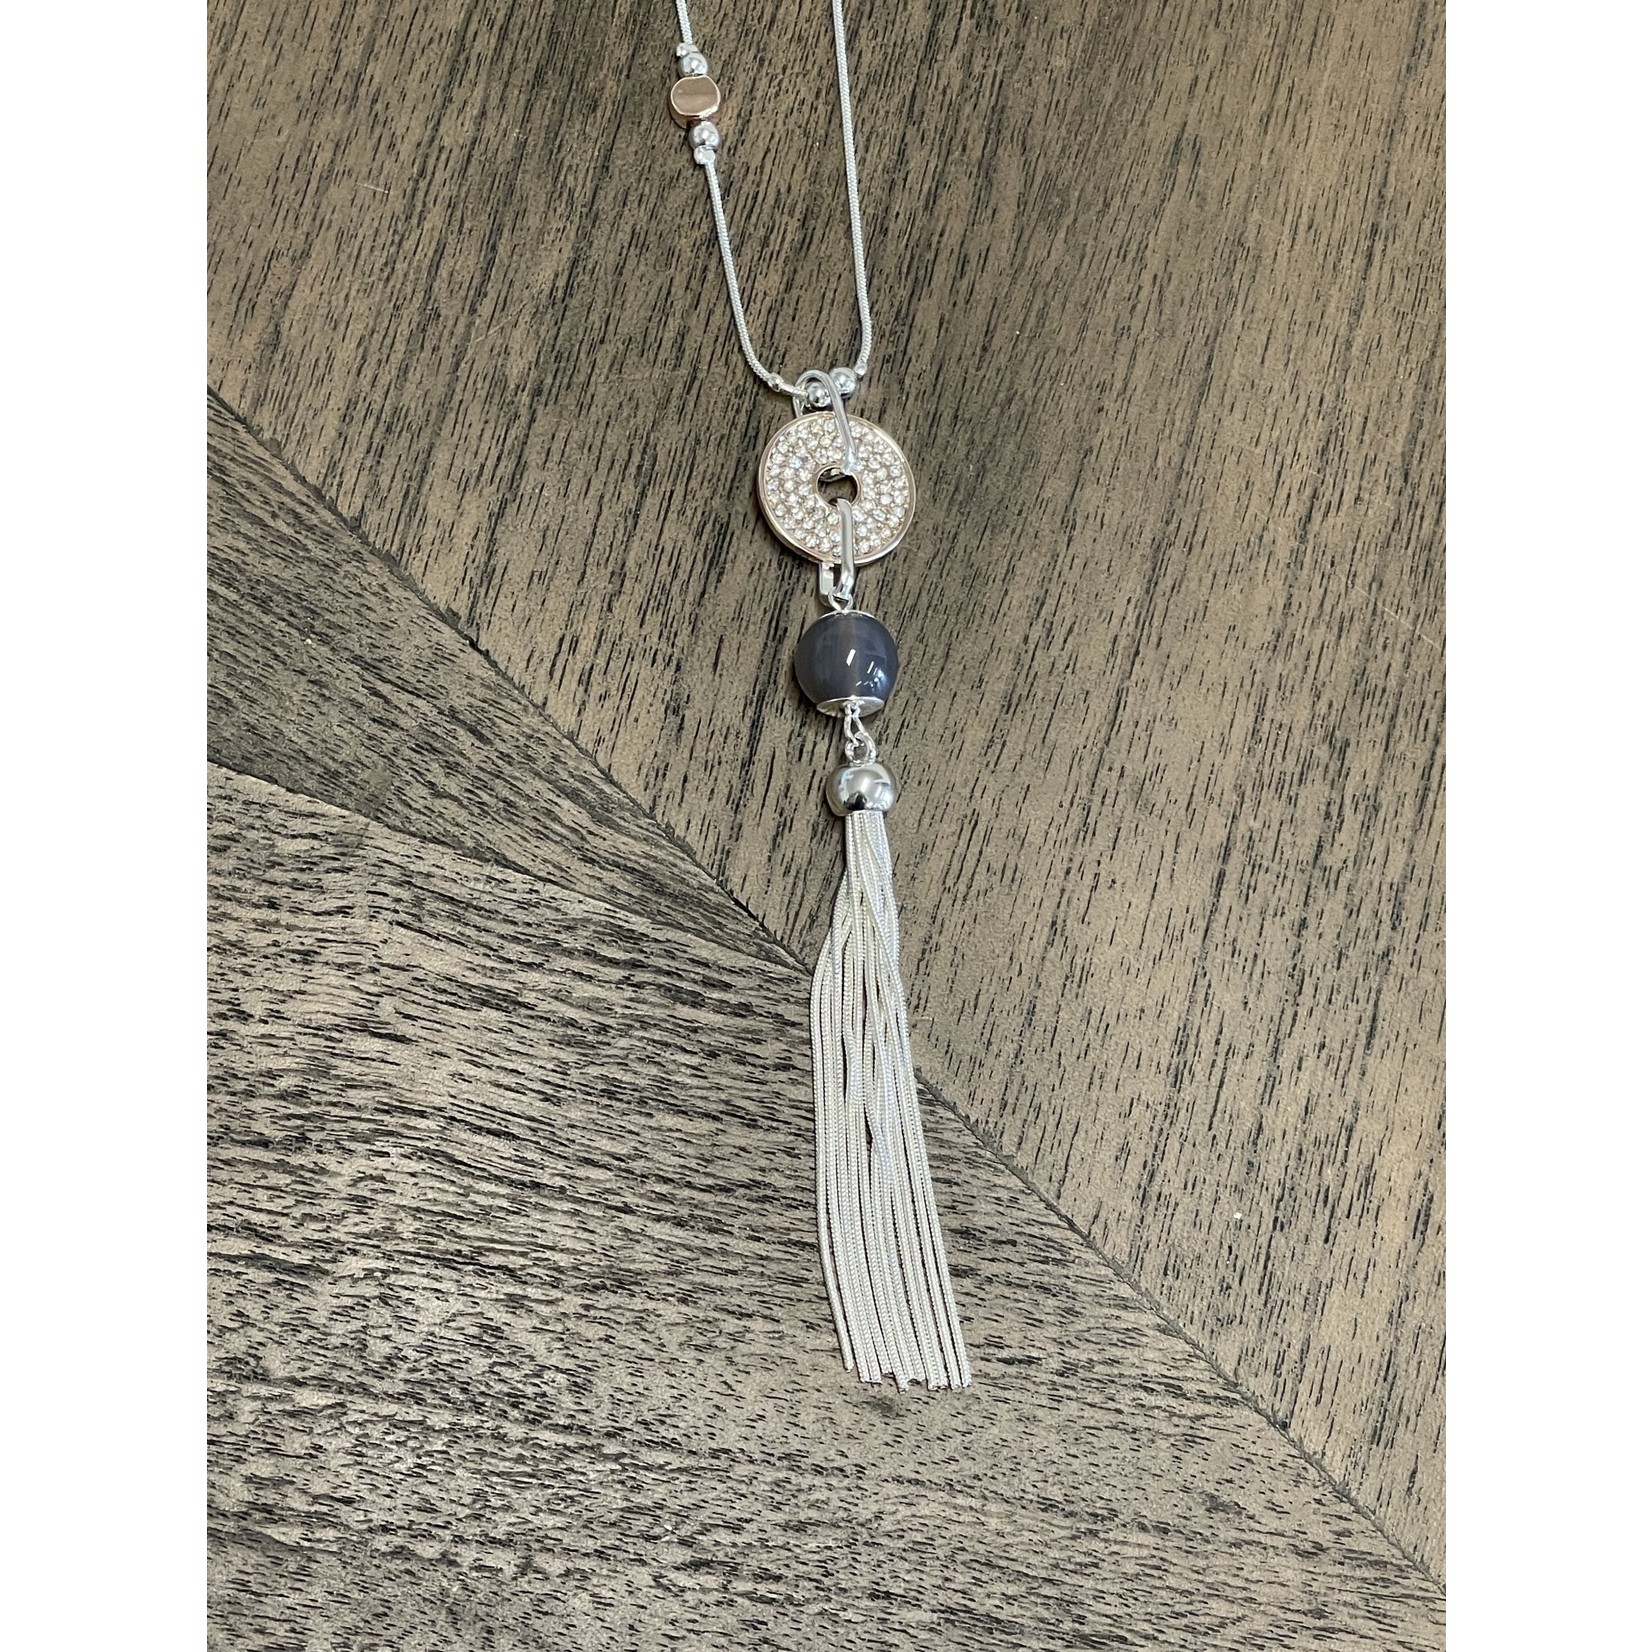 American Unique  Group Silver Snake Chain w/ Grey Bead, Tassel, Circle Bling Necklace